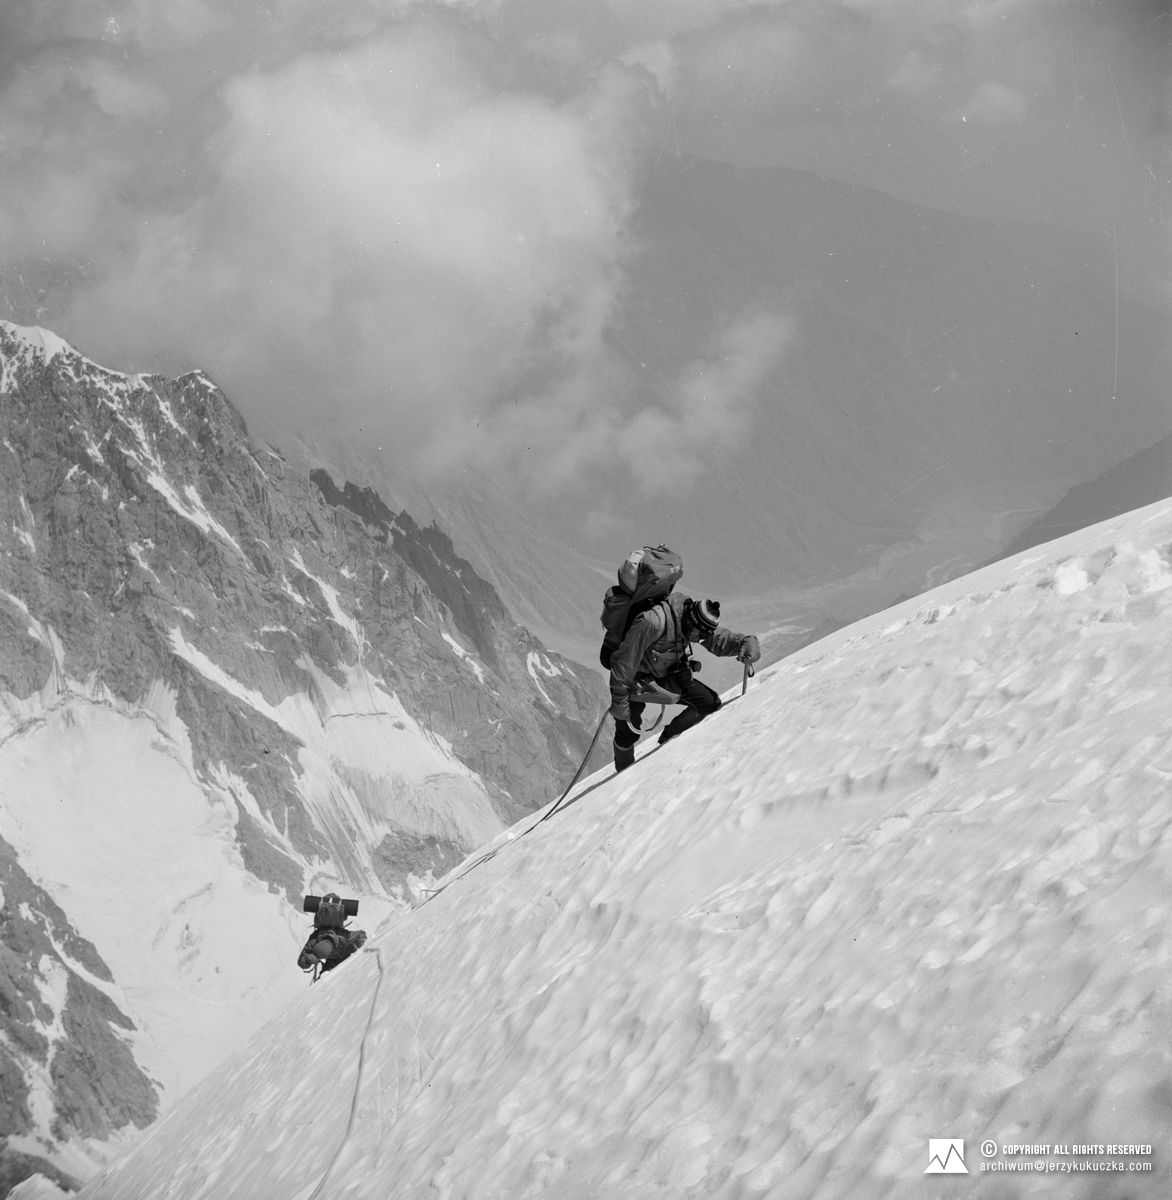 Participants of the expedition while climbing. From the left: Michał Wroczyński and Tadeusz Piotrowski.